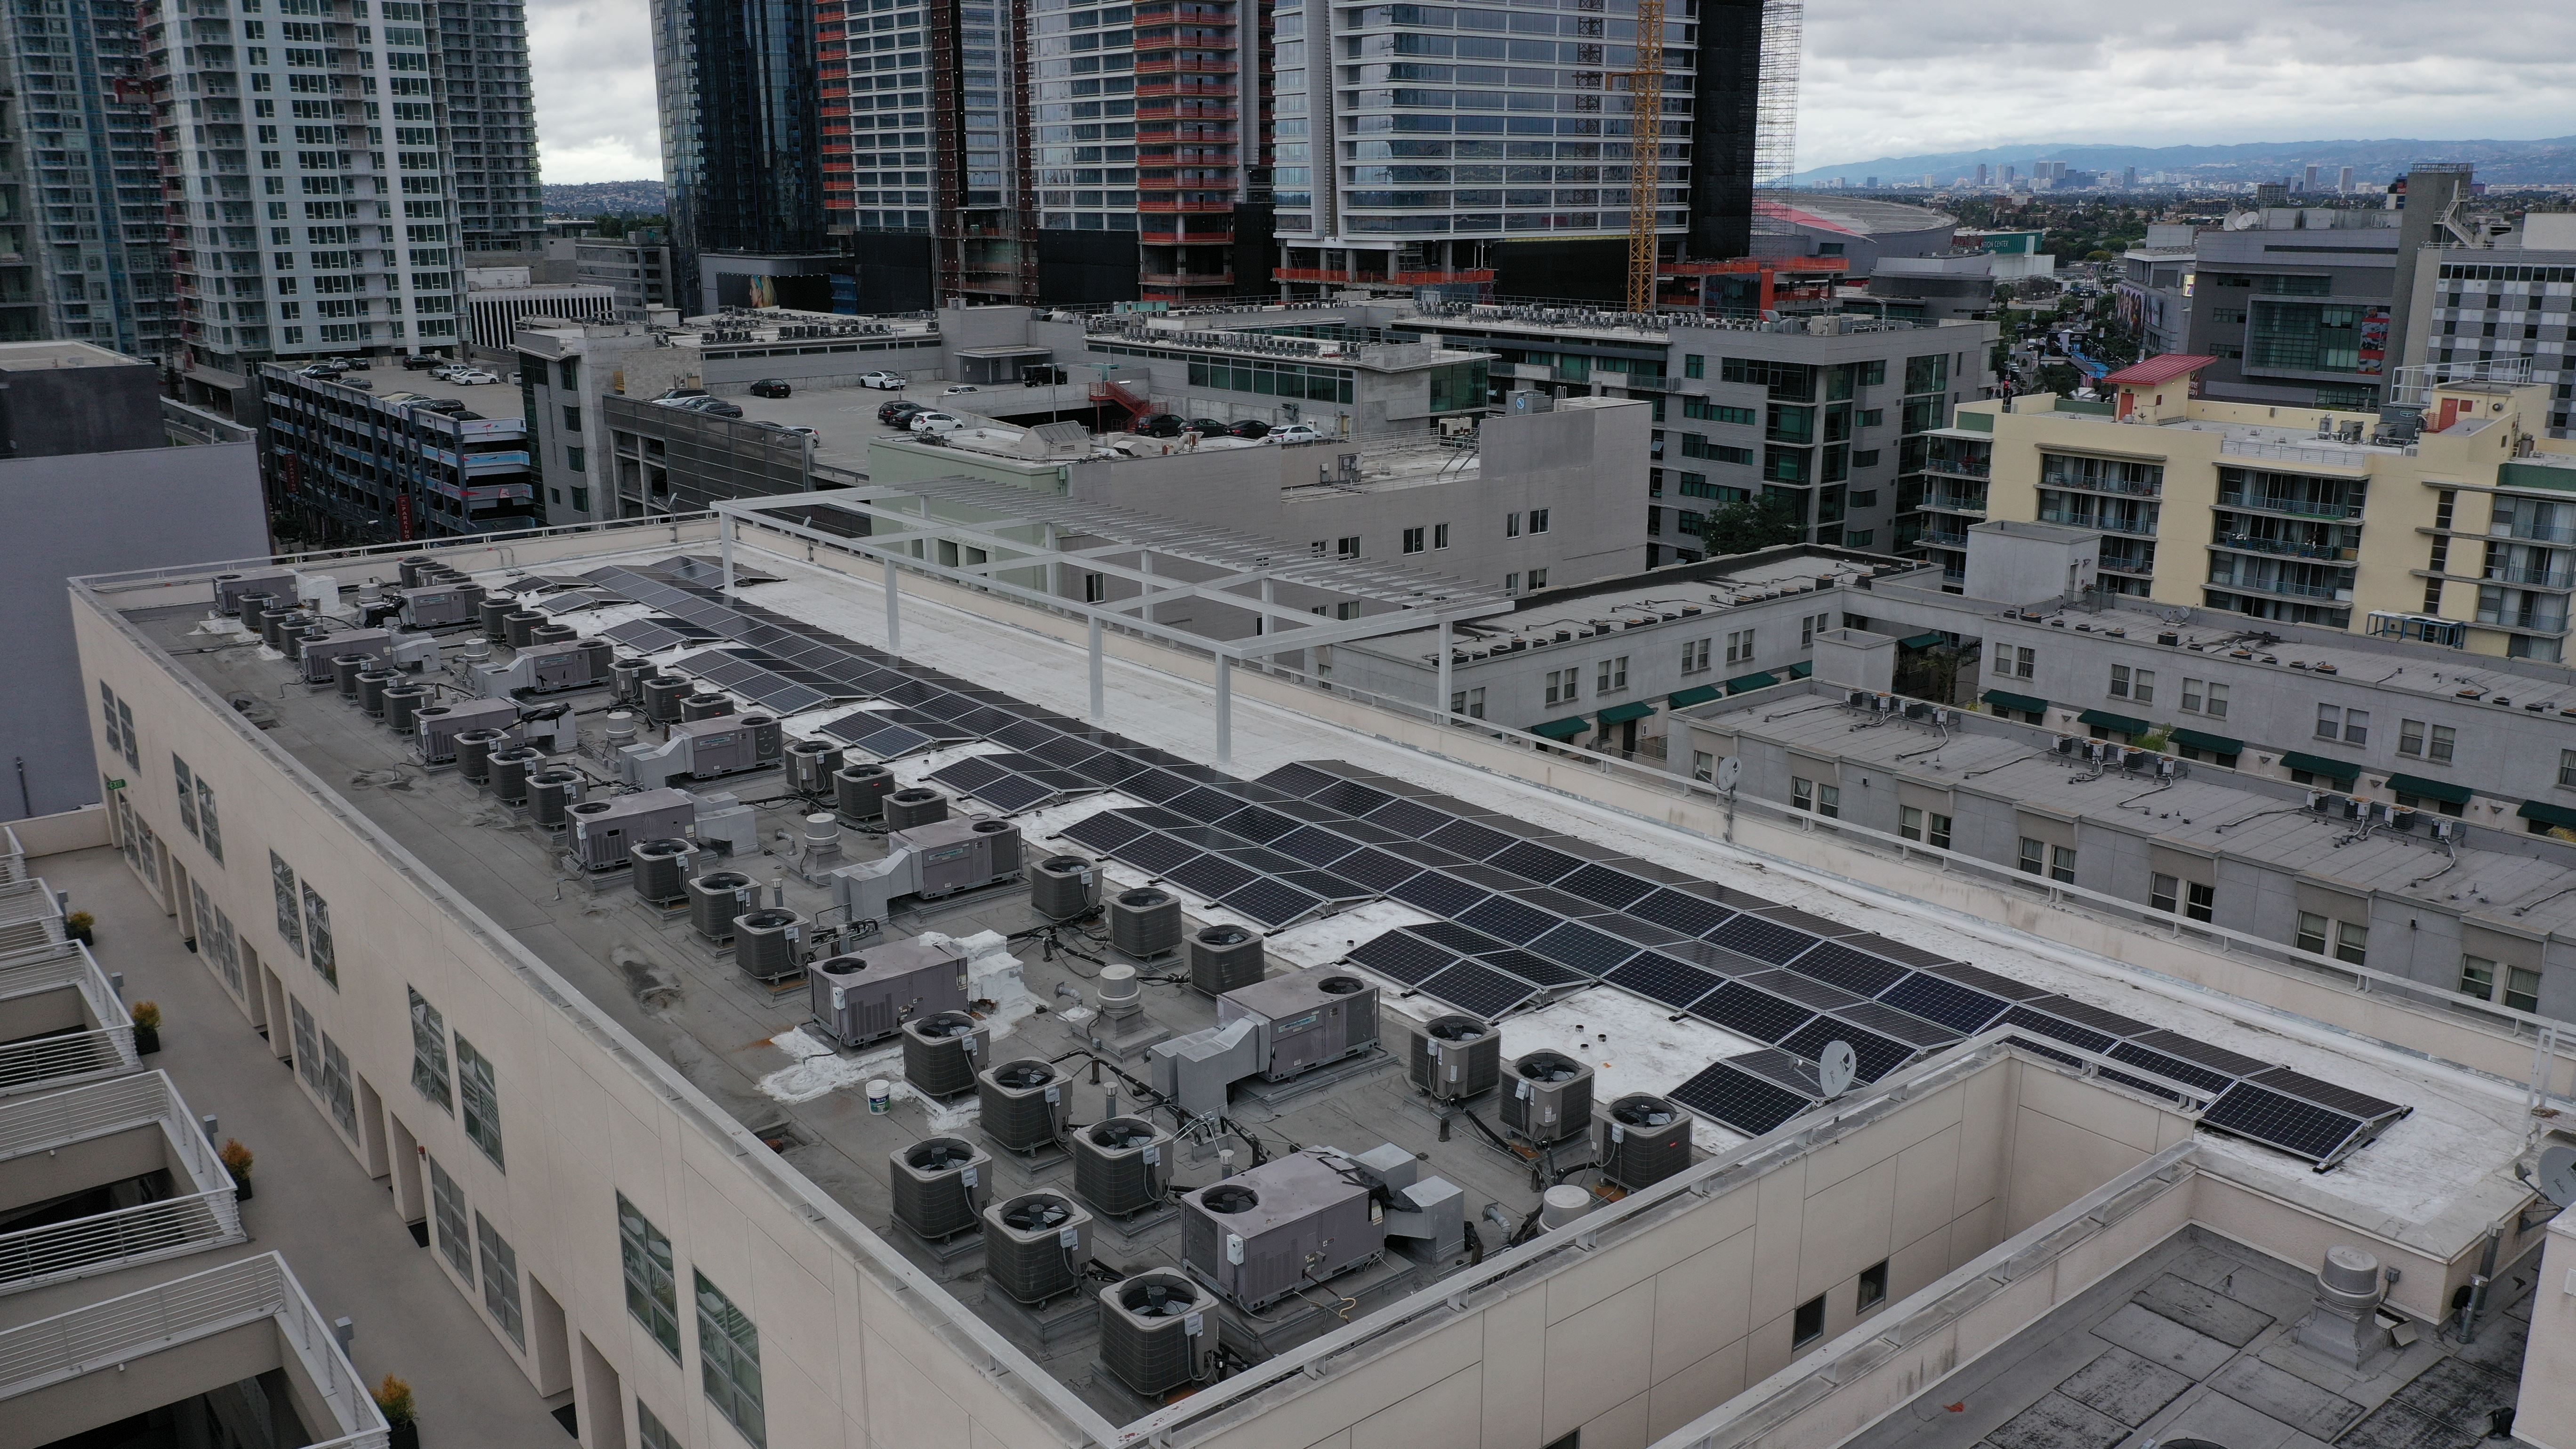 Rooftop solar panels on apartment building.